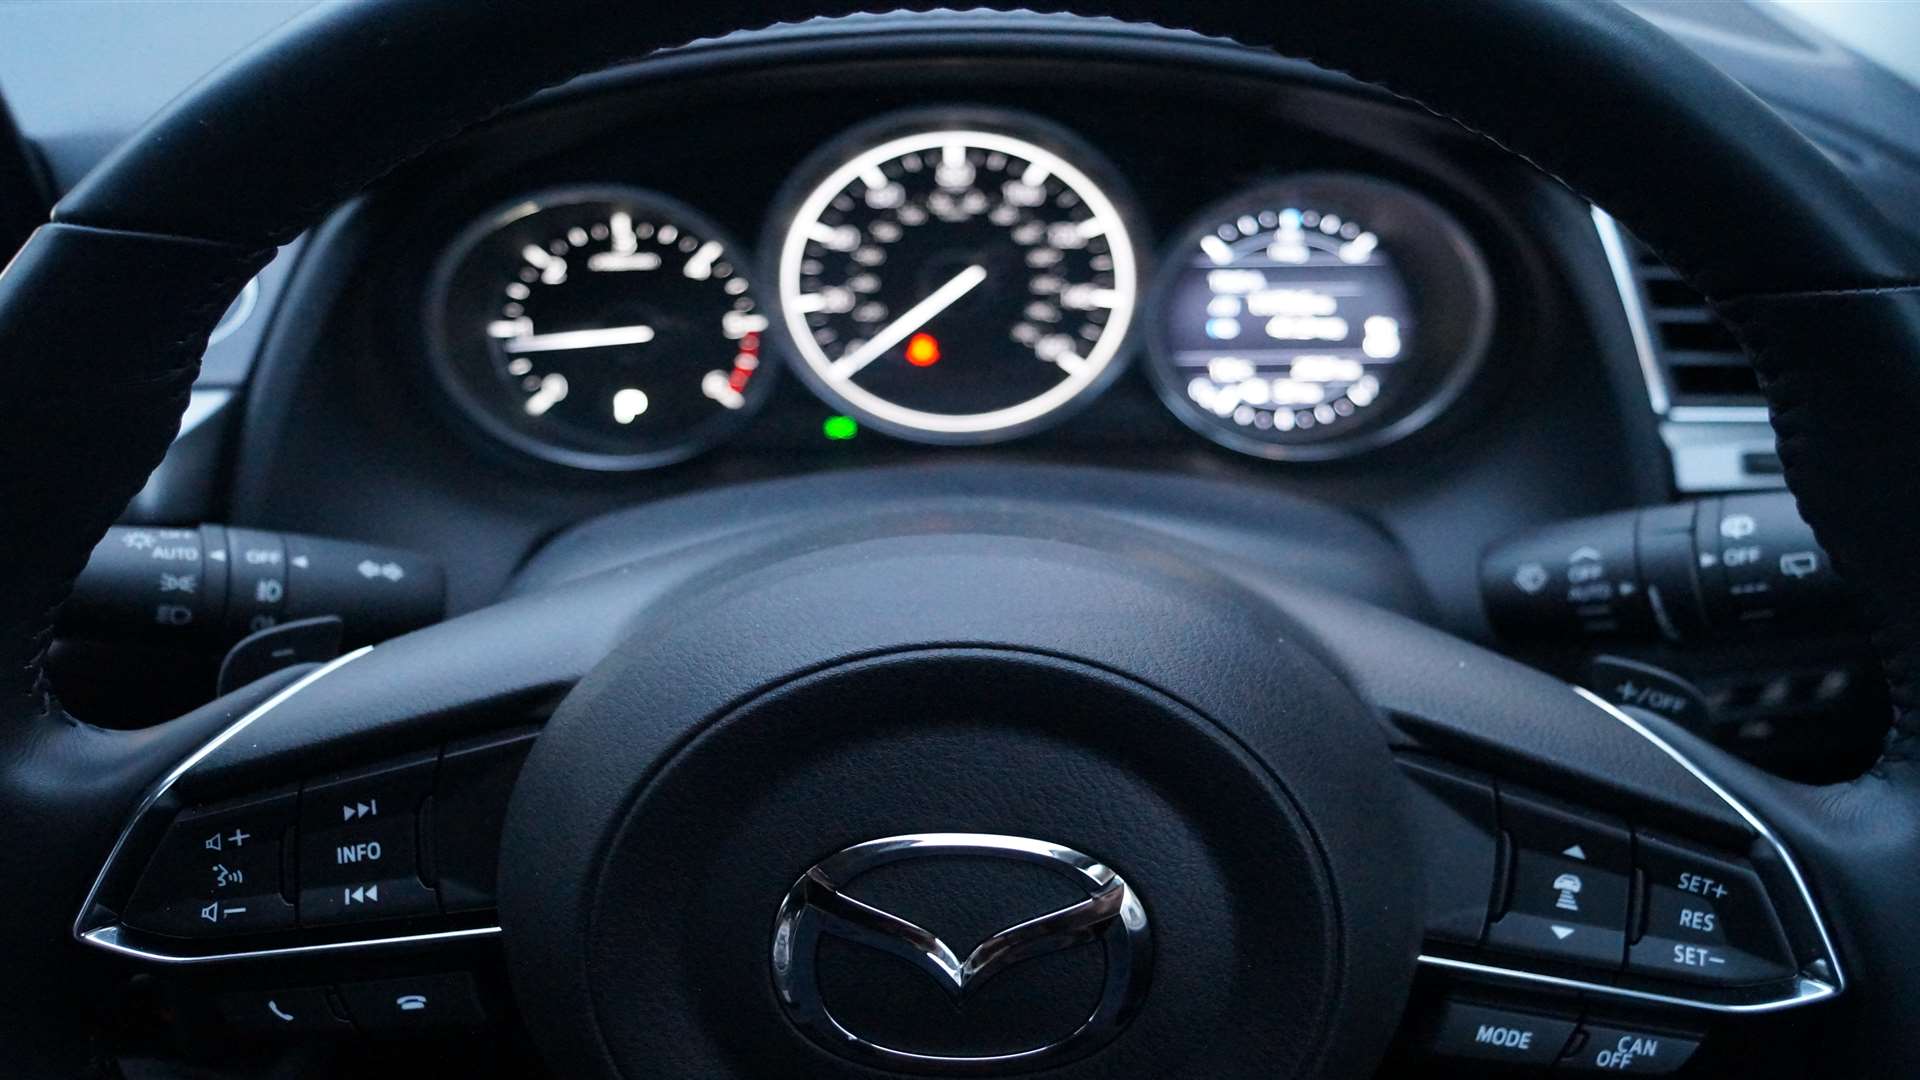 The dashboard has a much more thoughtful, modern layout and Mazda has upgraded the cabin materials